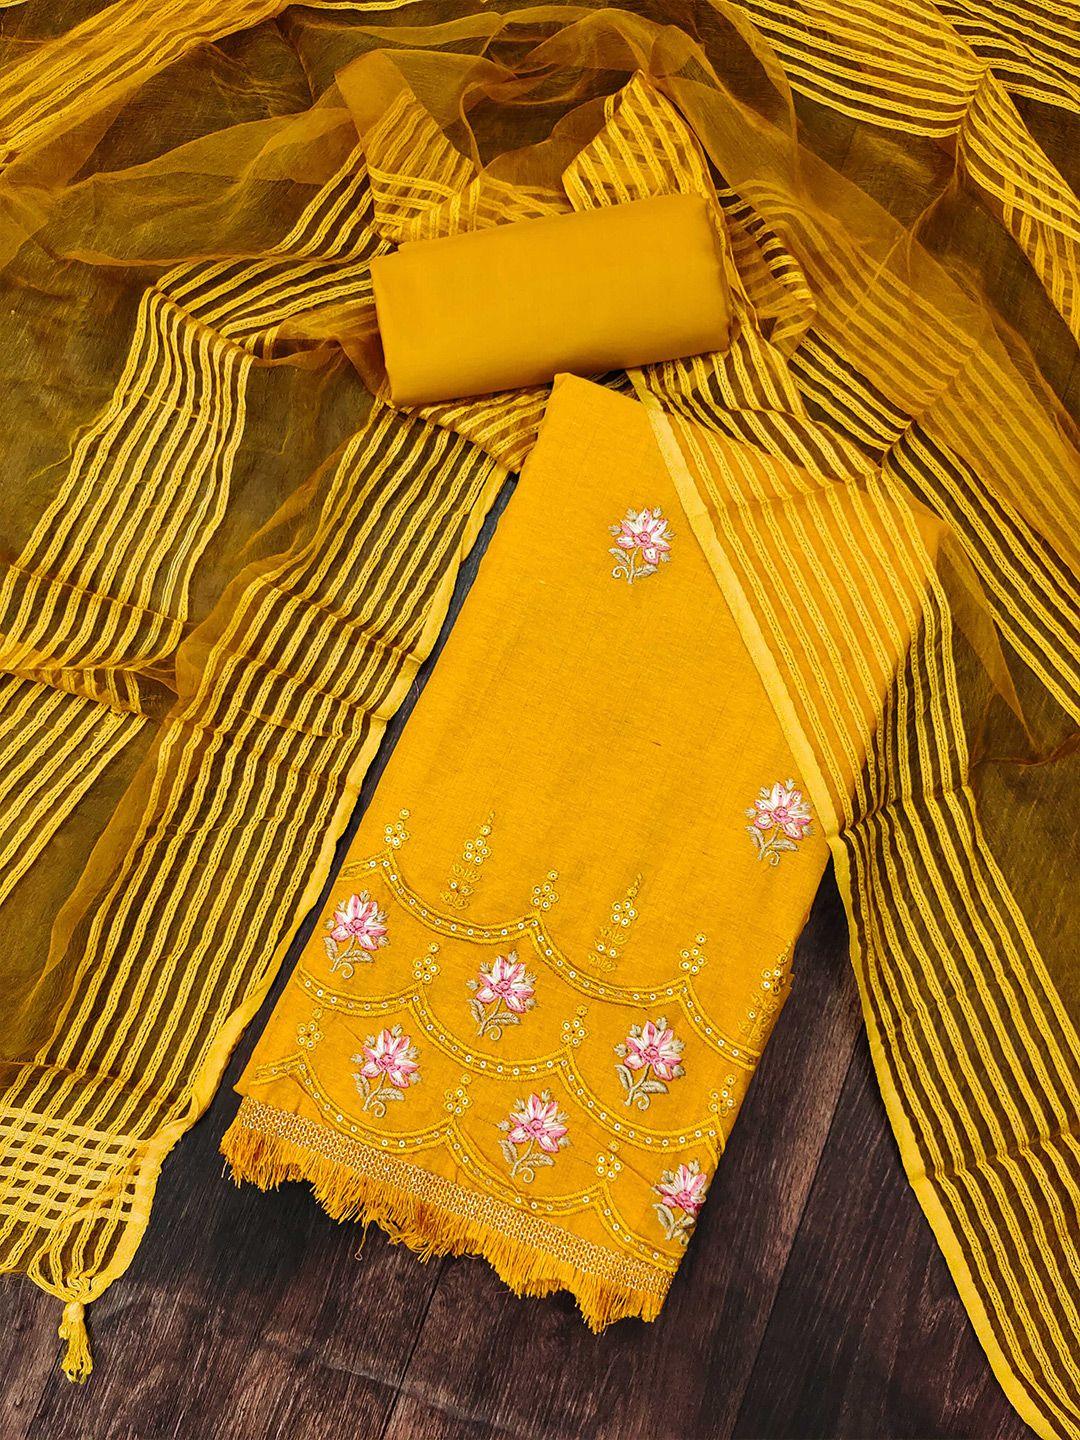 kalini yellow & yellow embroidered pure cotton unstitched dress material